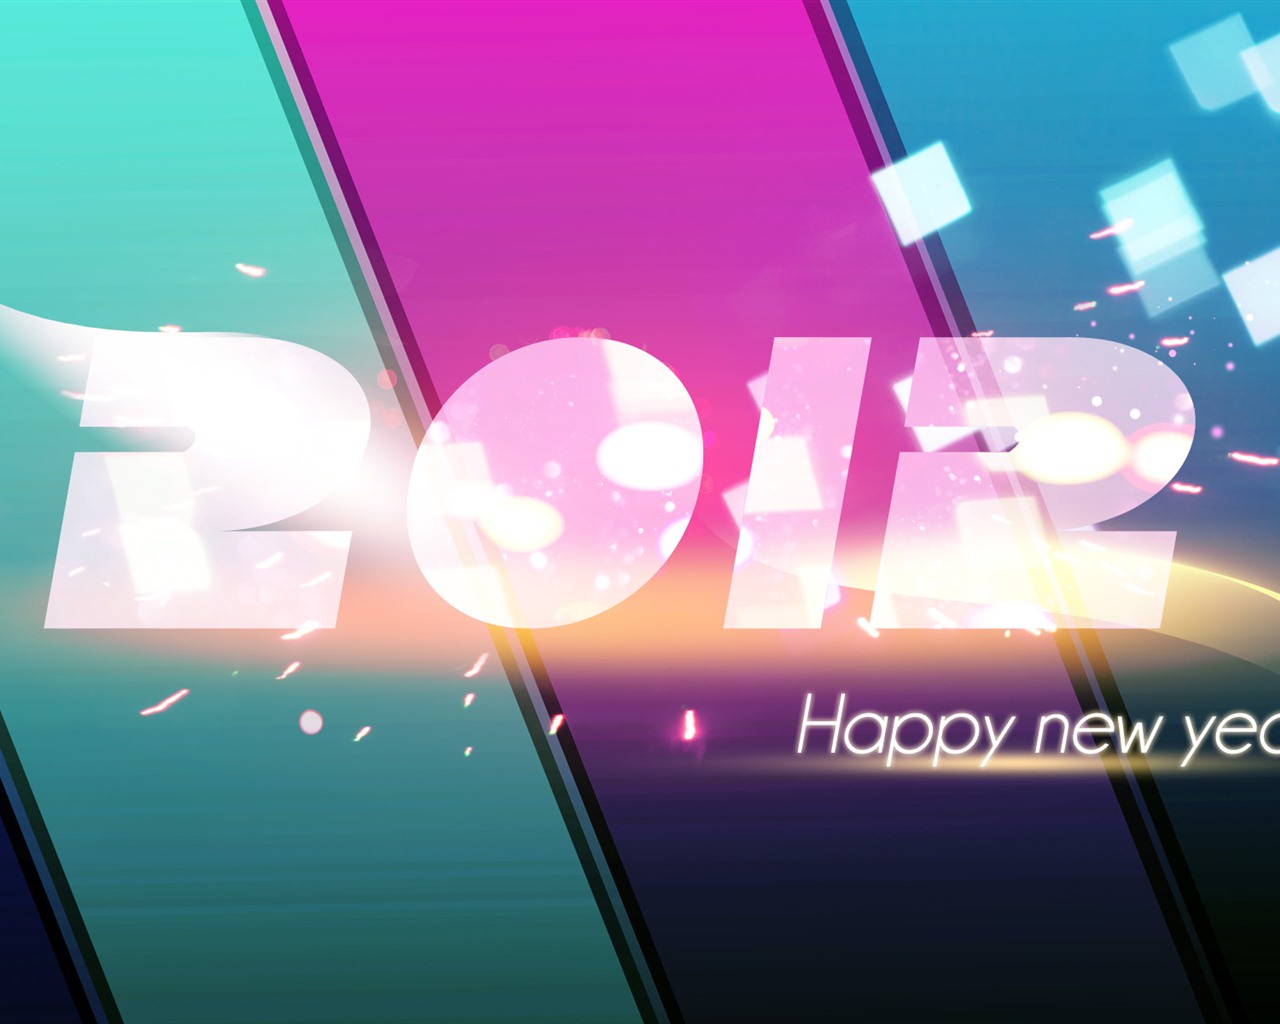 2012 New Year wallpapers (1) #14 - 1280x1024